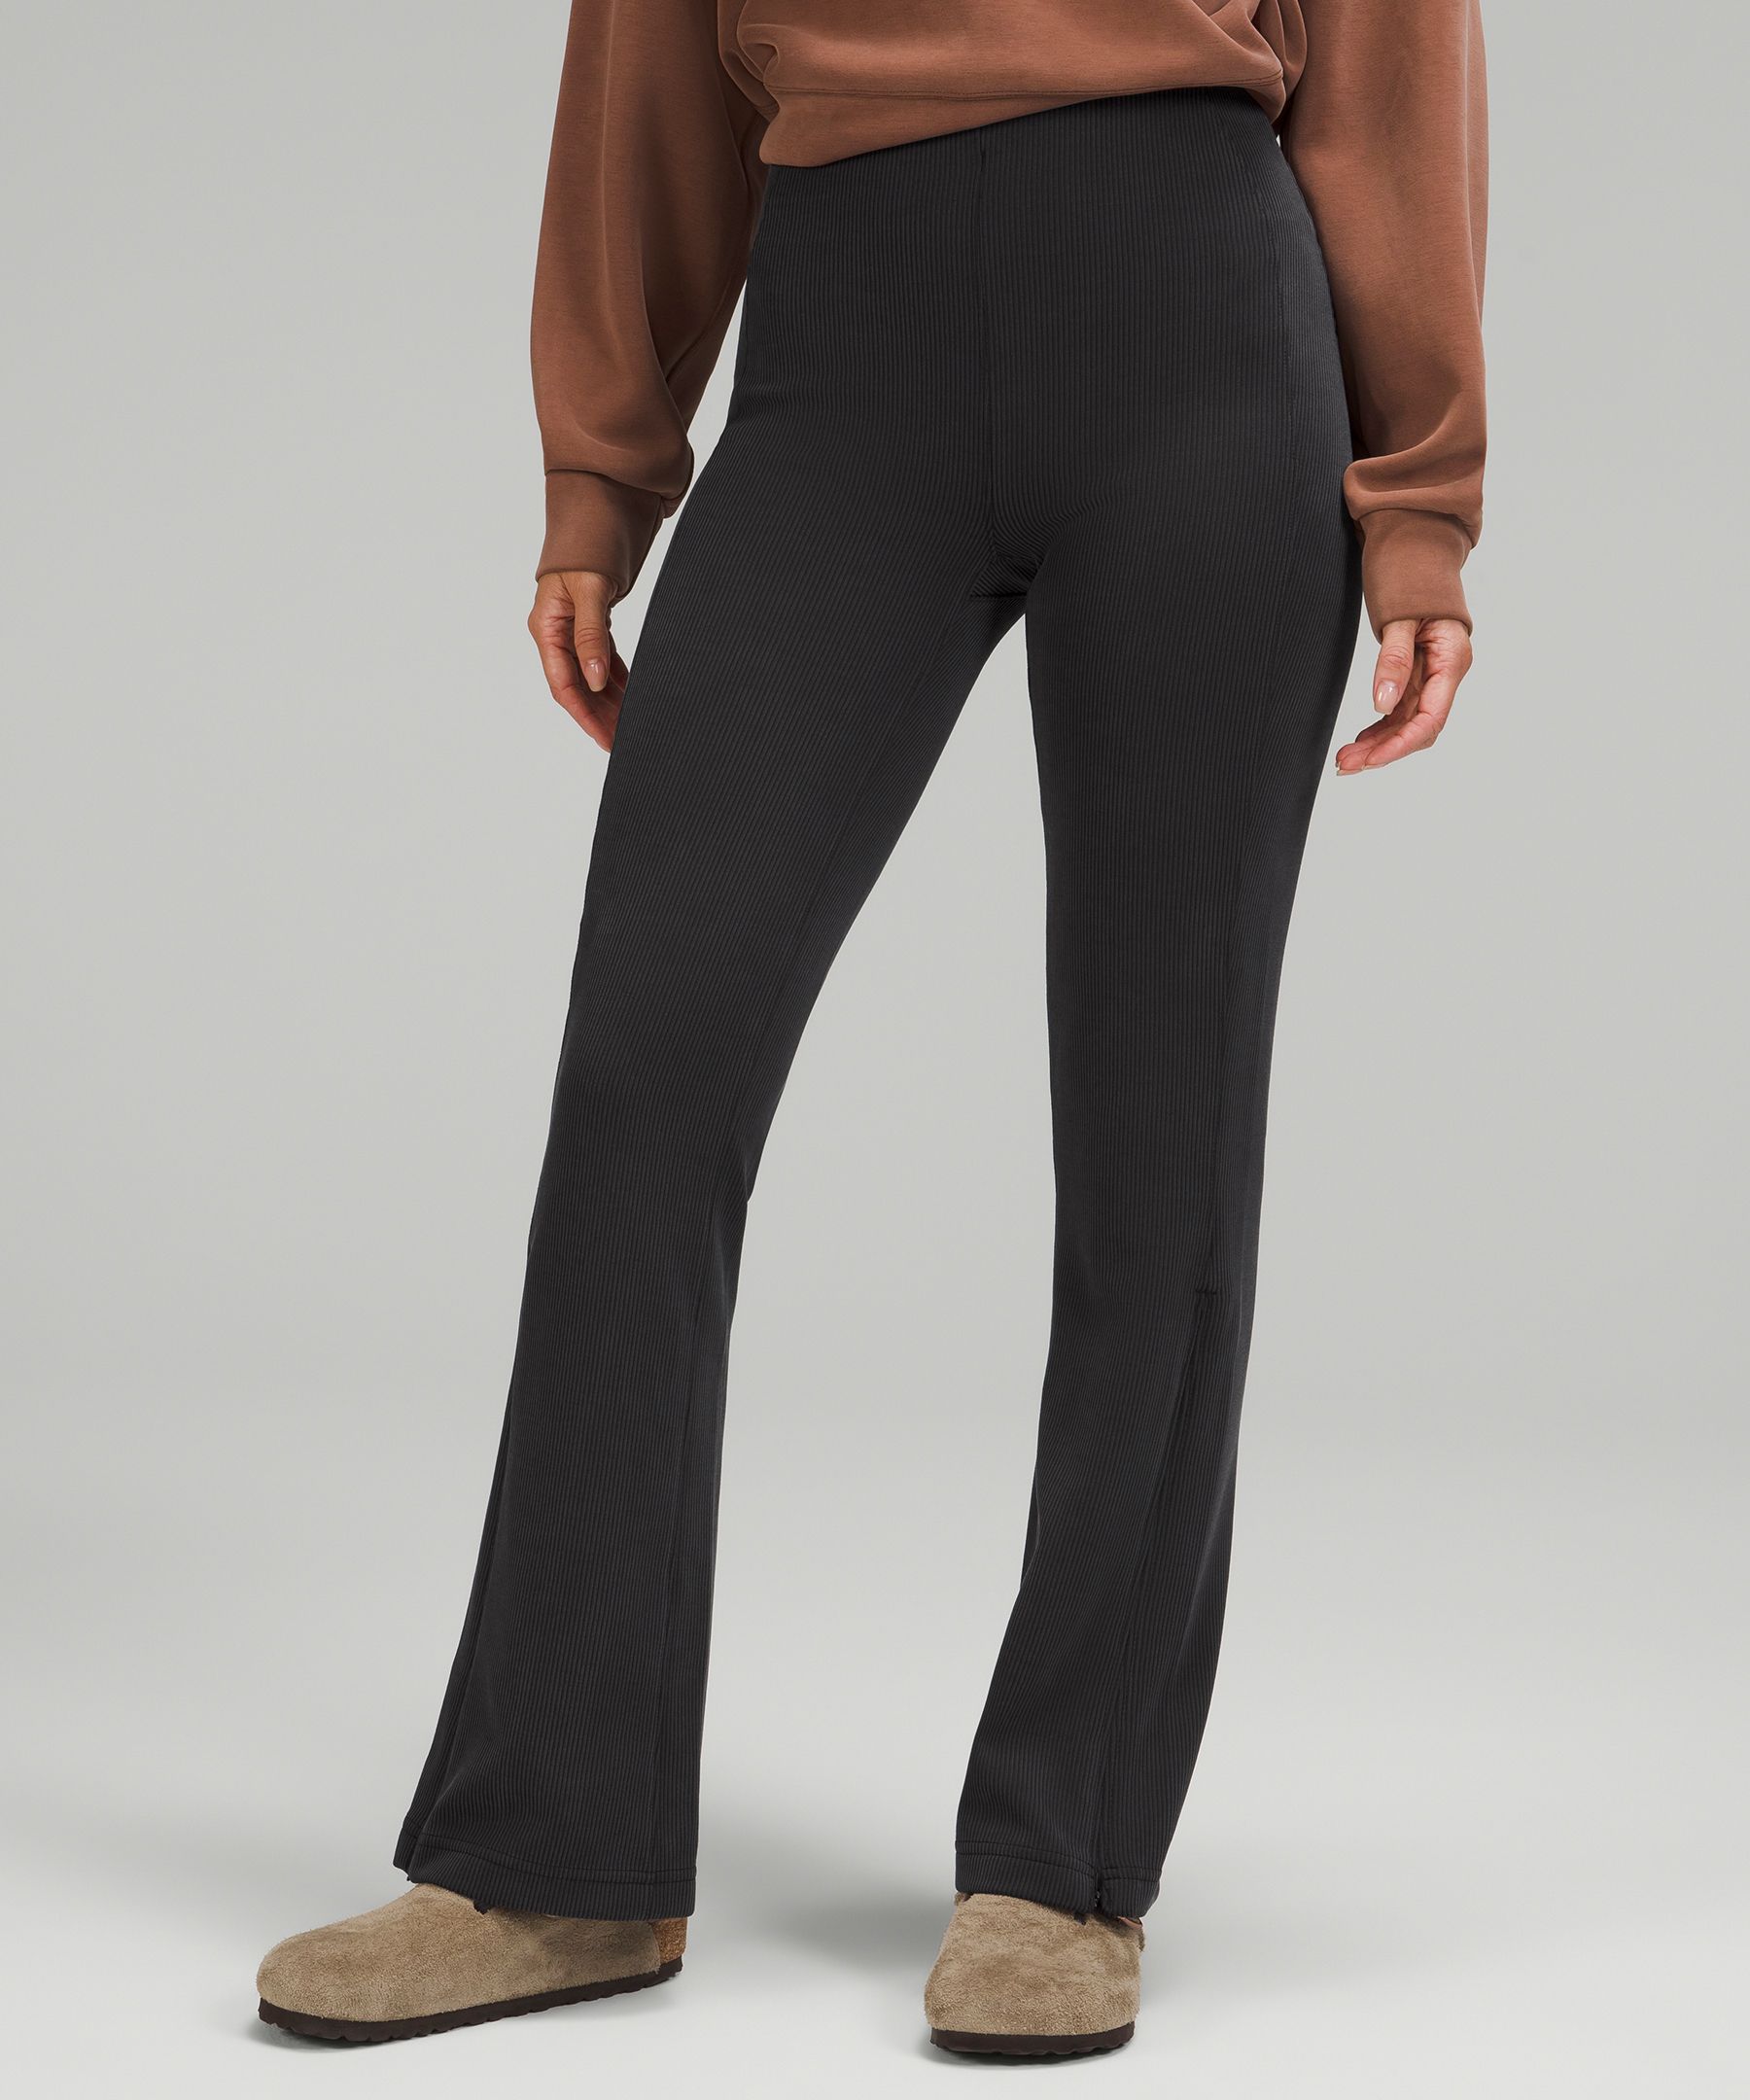 Lululemon Flare Pants Review  International Society of Precision